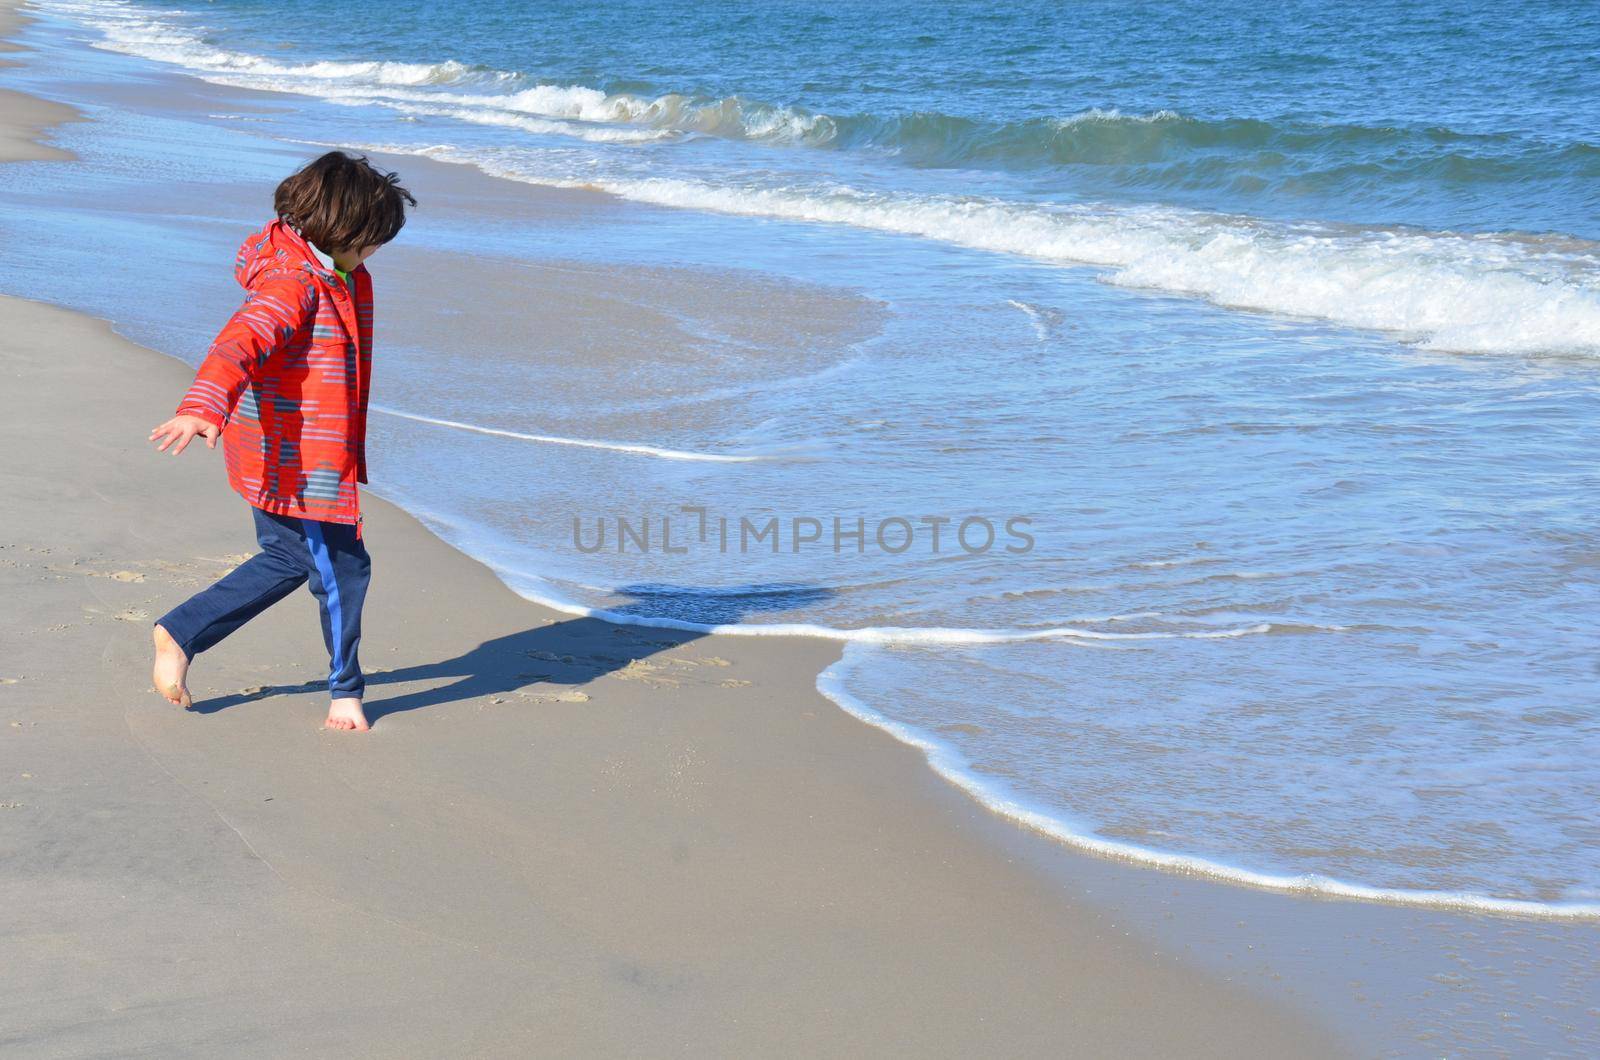 boy in red jacket and beach with water and sand by stockphotofan1